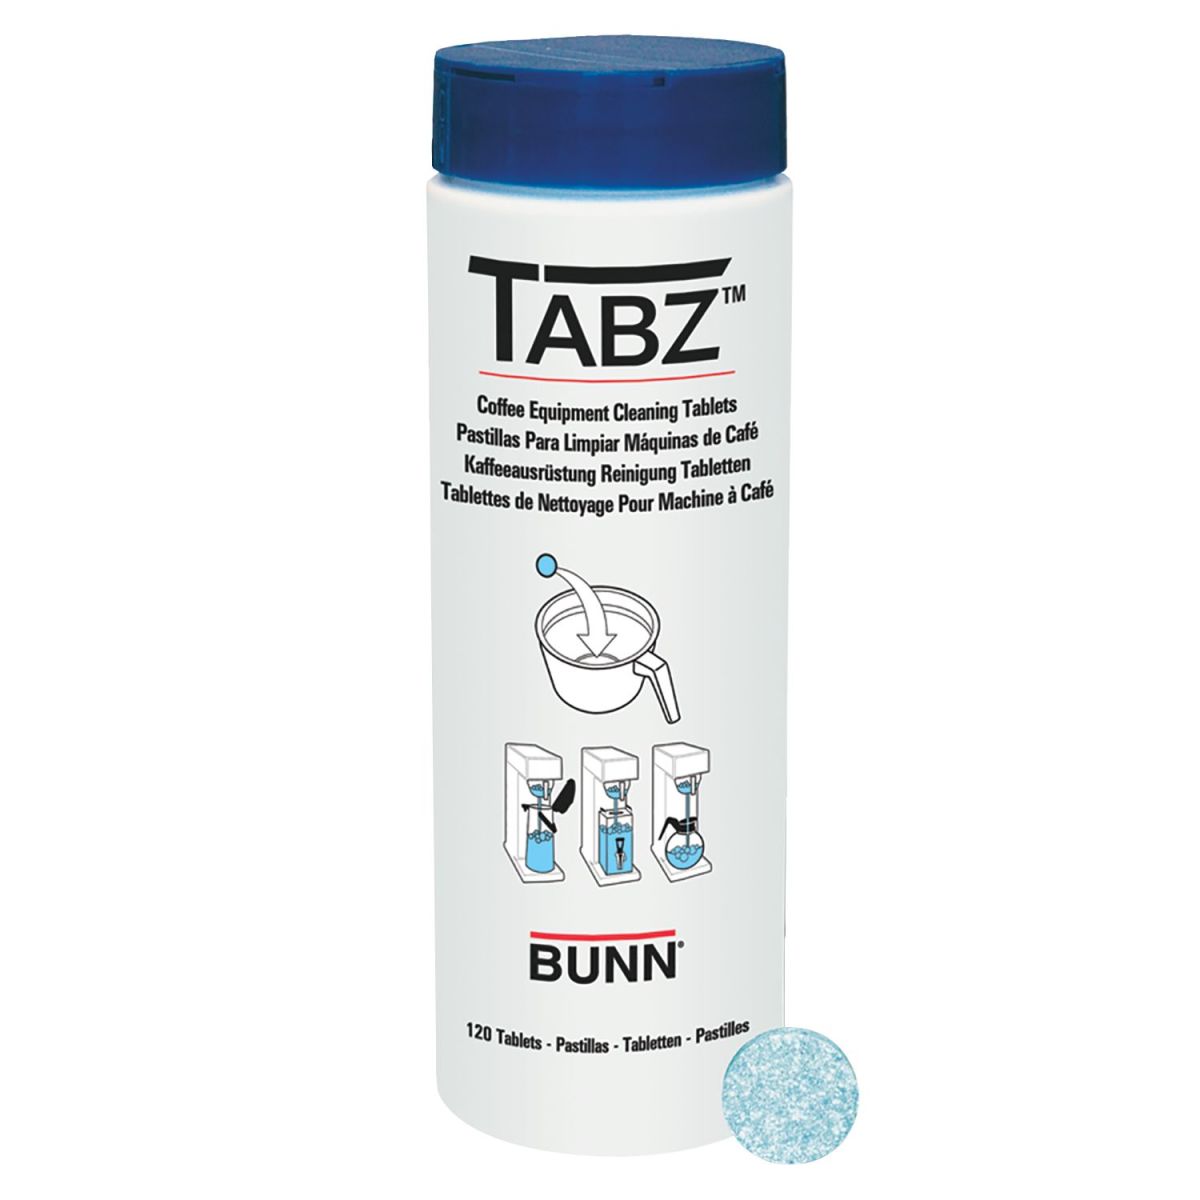 Cleaner, Brewer Tabz 120 Tablets